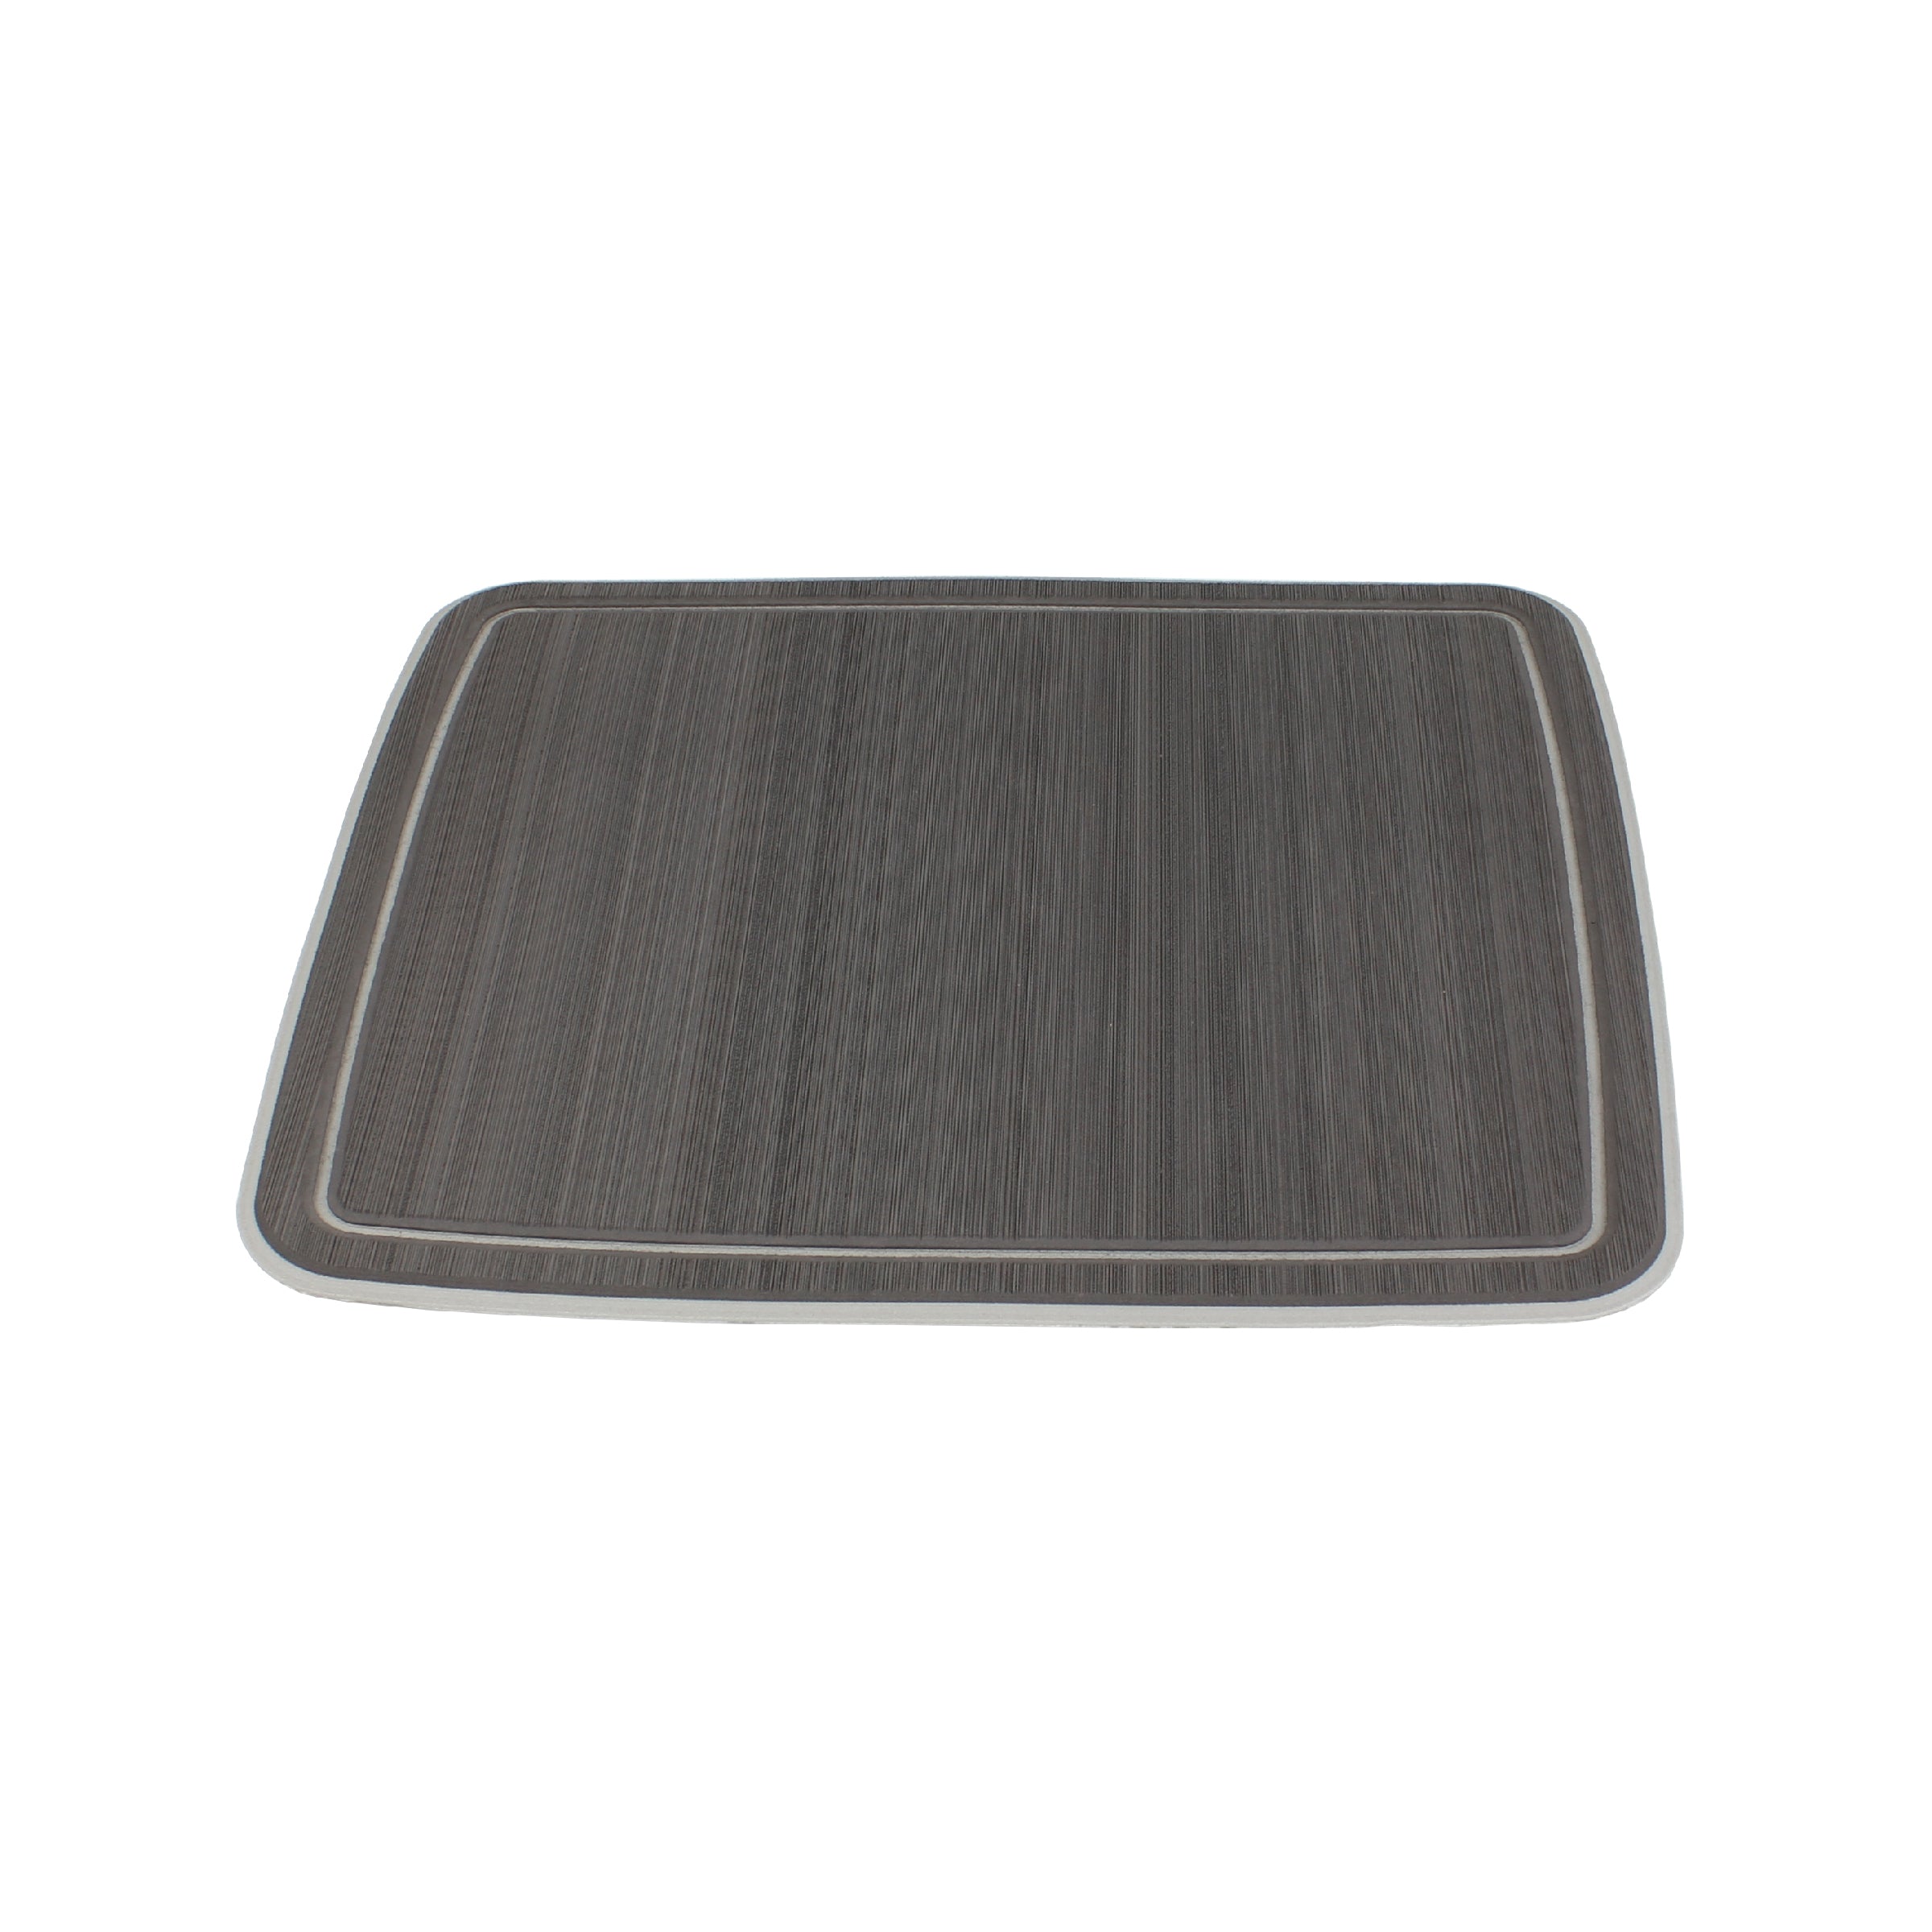 Party Boat Table Center Foam Charcoal Mats | ITC Shop Now